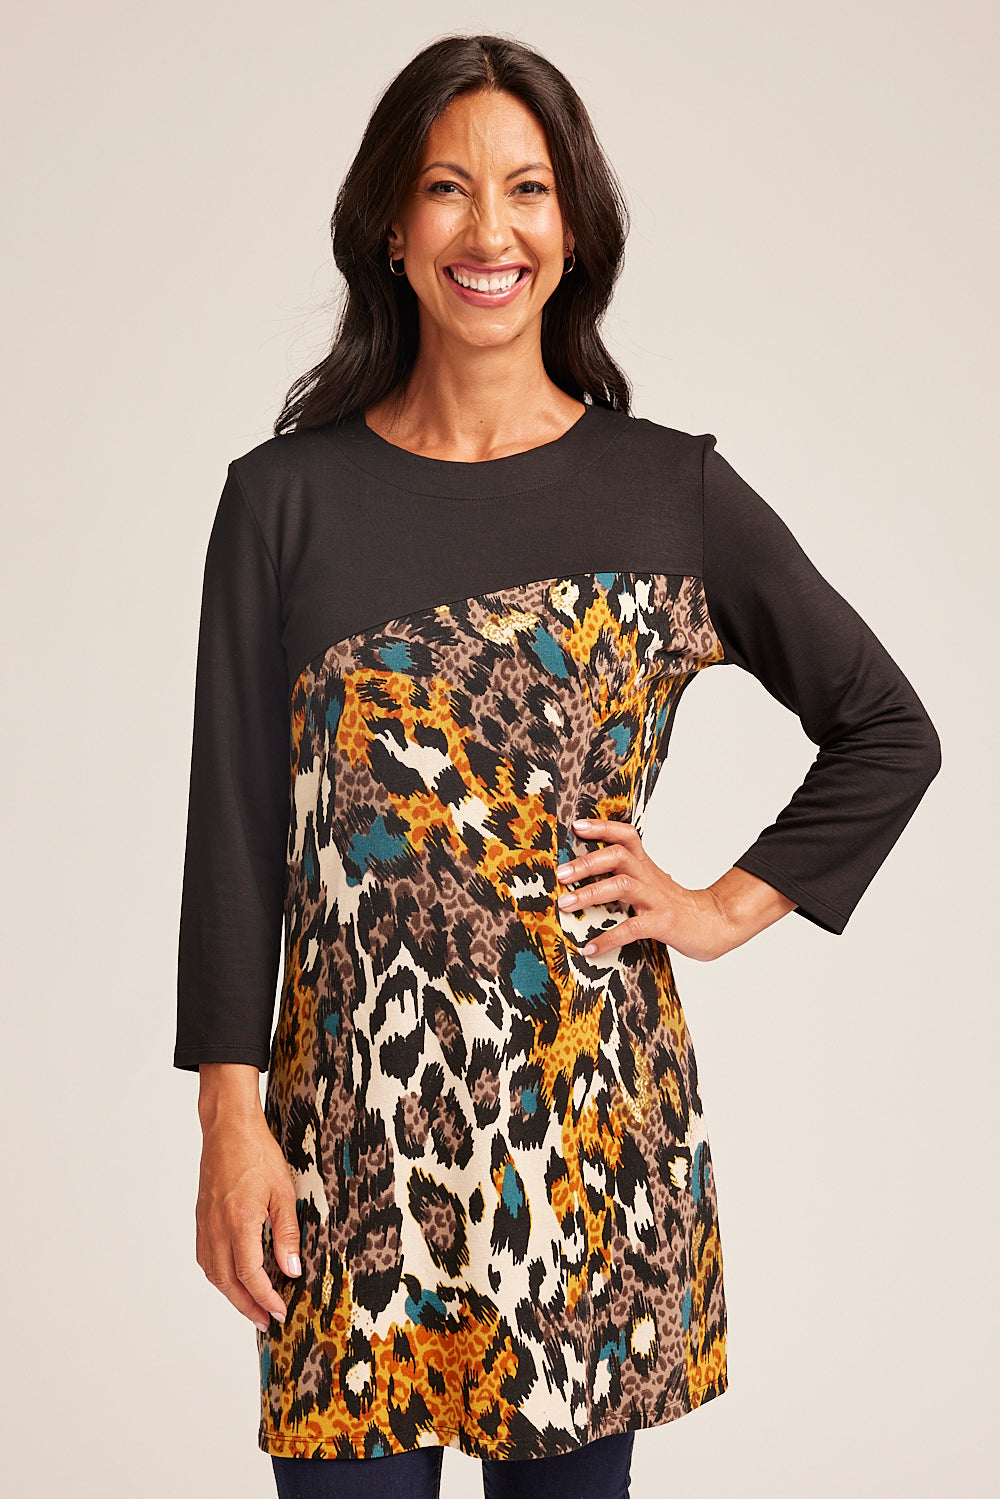 Saloos Stretchy Panelled Tunic Top